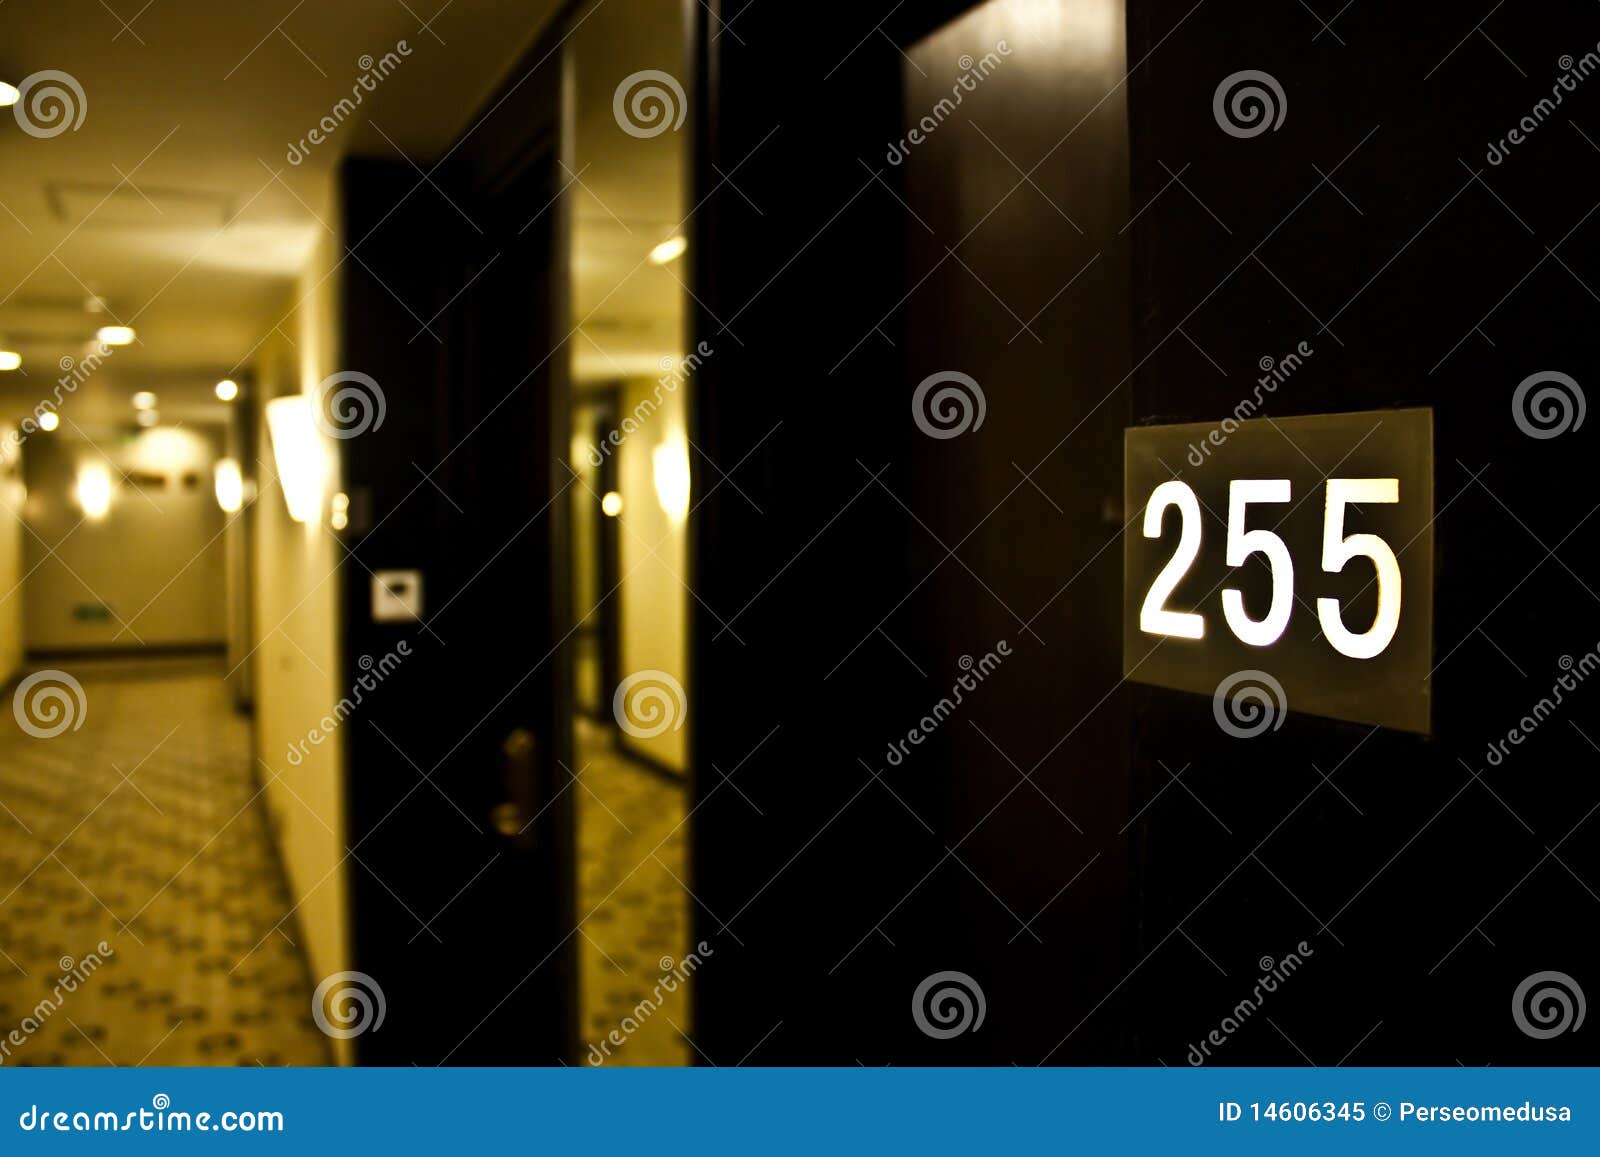 Room number stock image. 